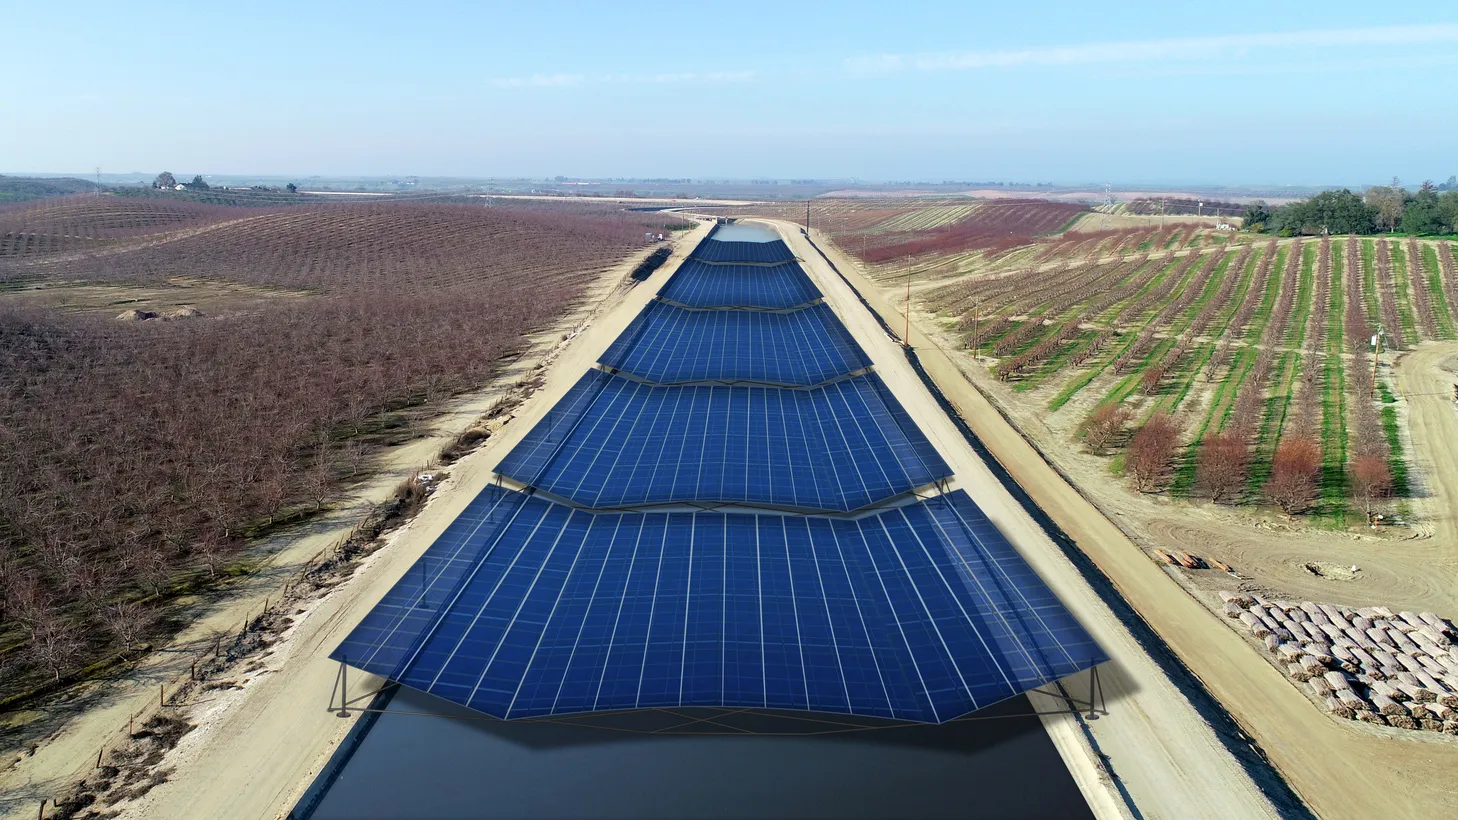 California’s first solar canal project is slated to break ground early next year.